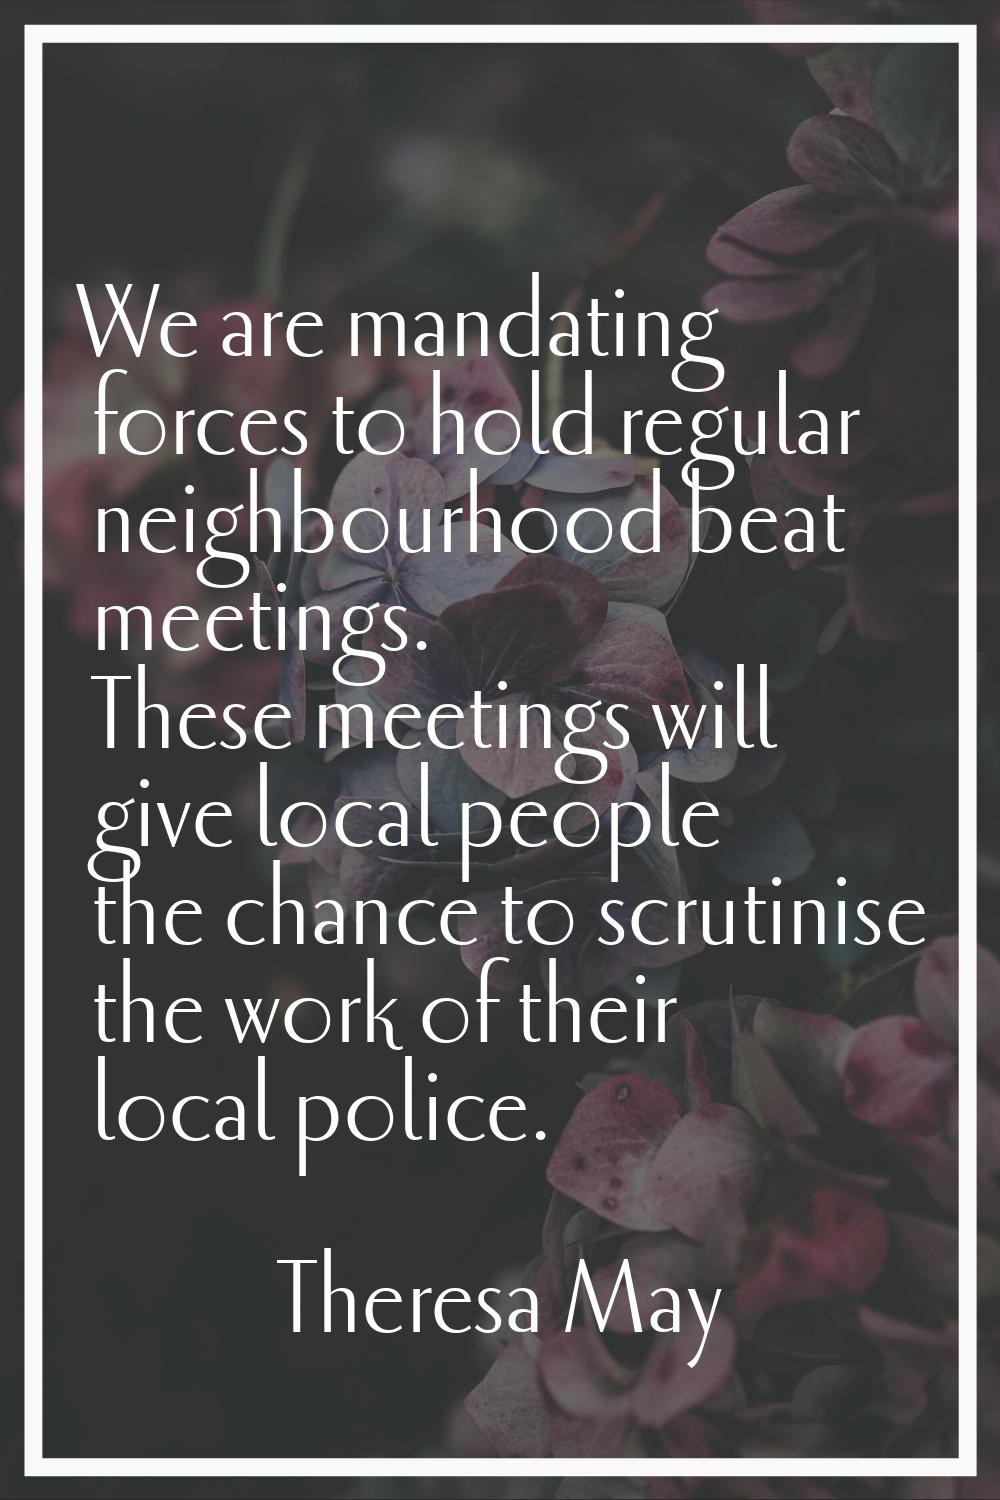 We are mandating forces to hold regular neighbourhood beat meetings. These meetings will give local